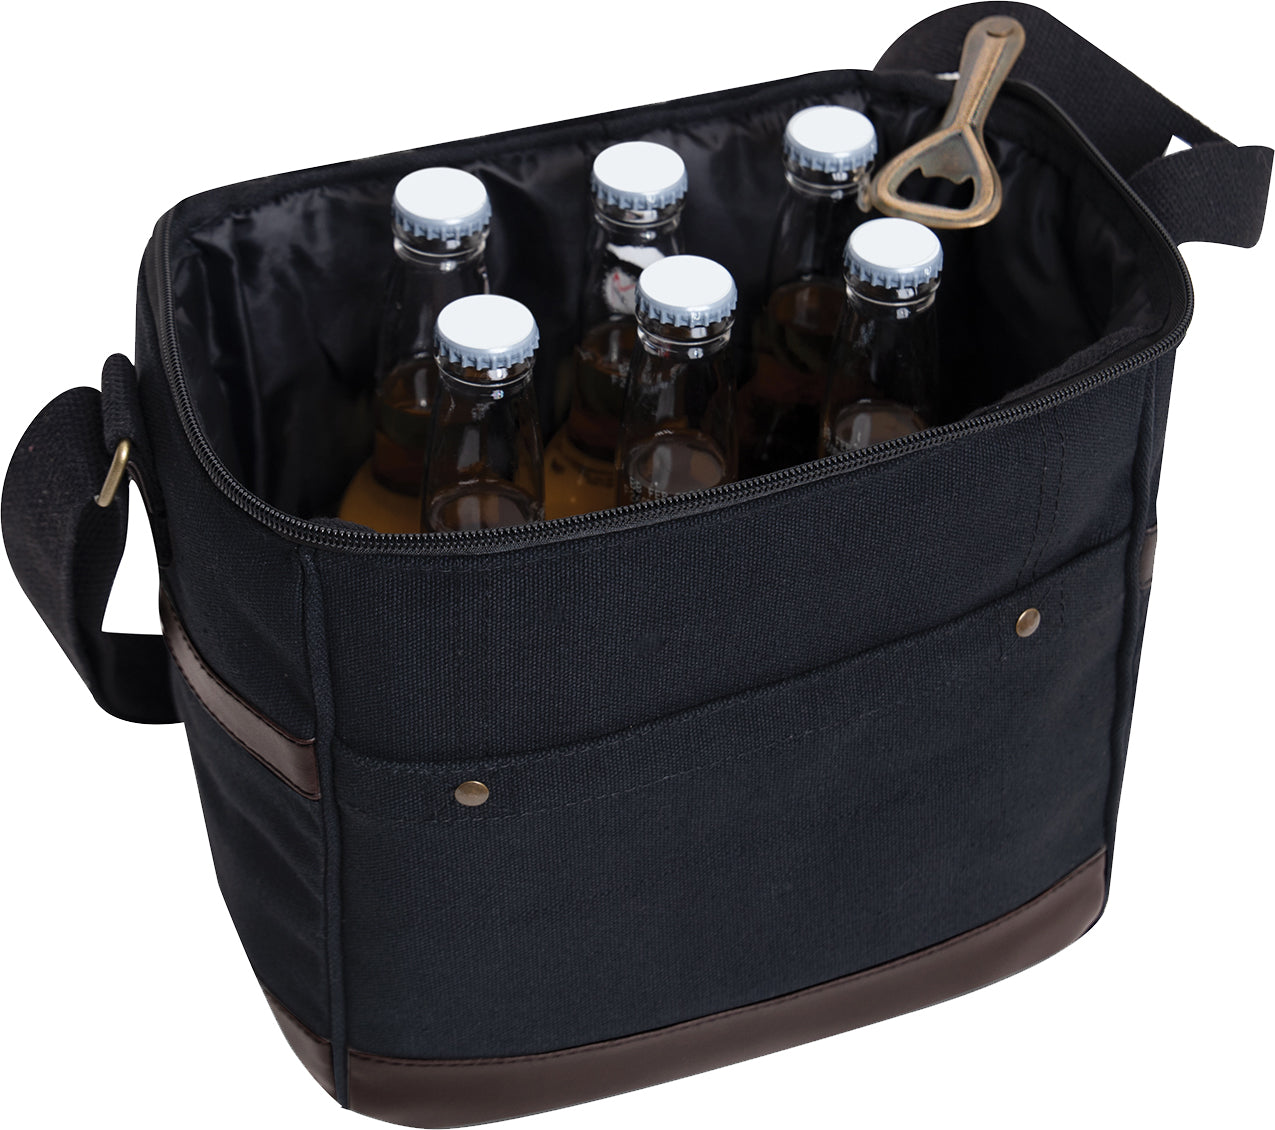 Black - Canvas Insulated Cooler Bag